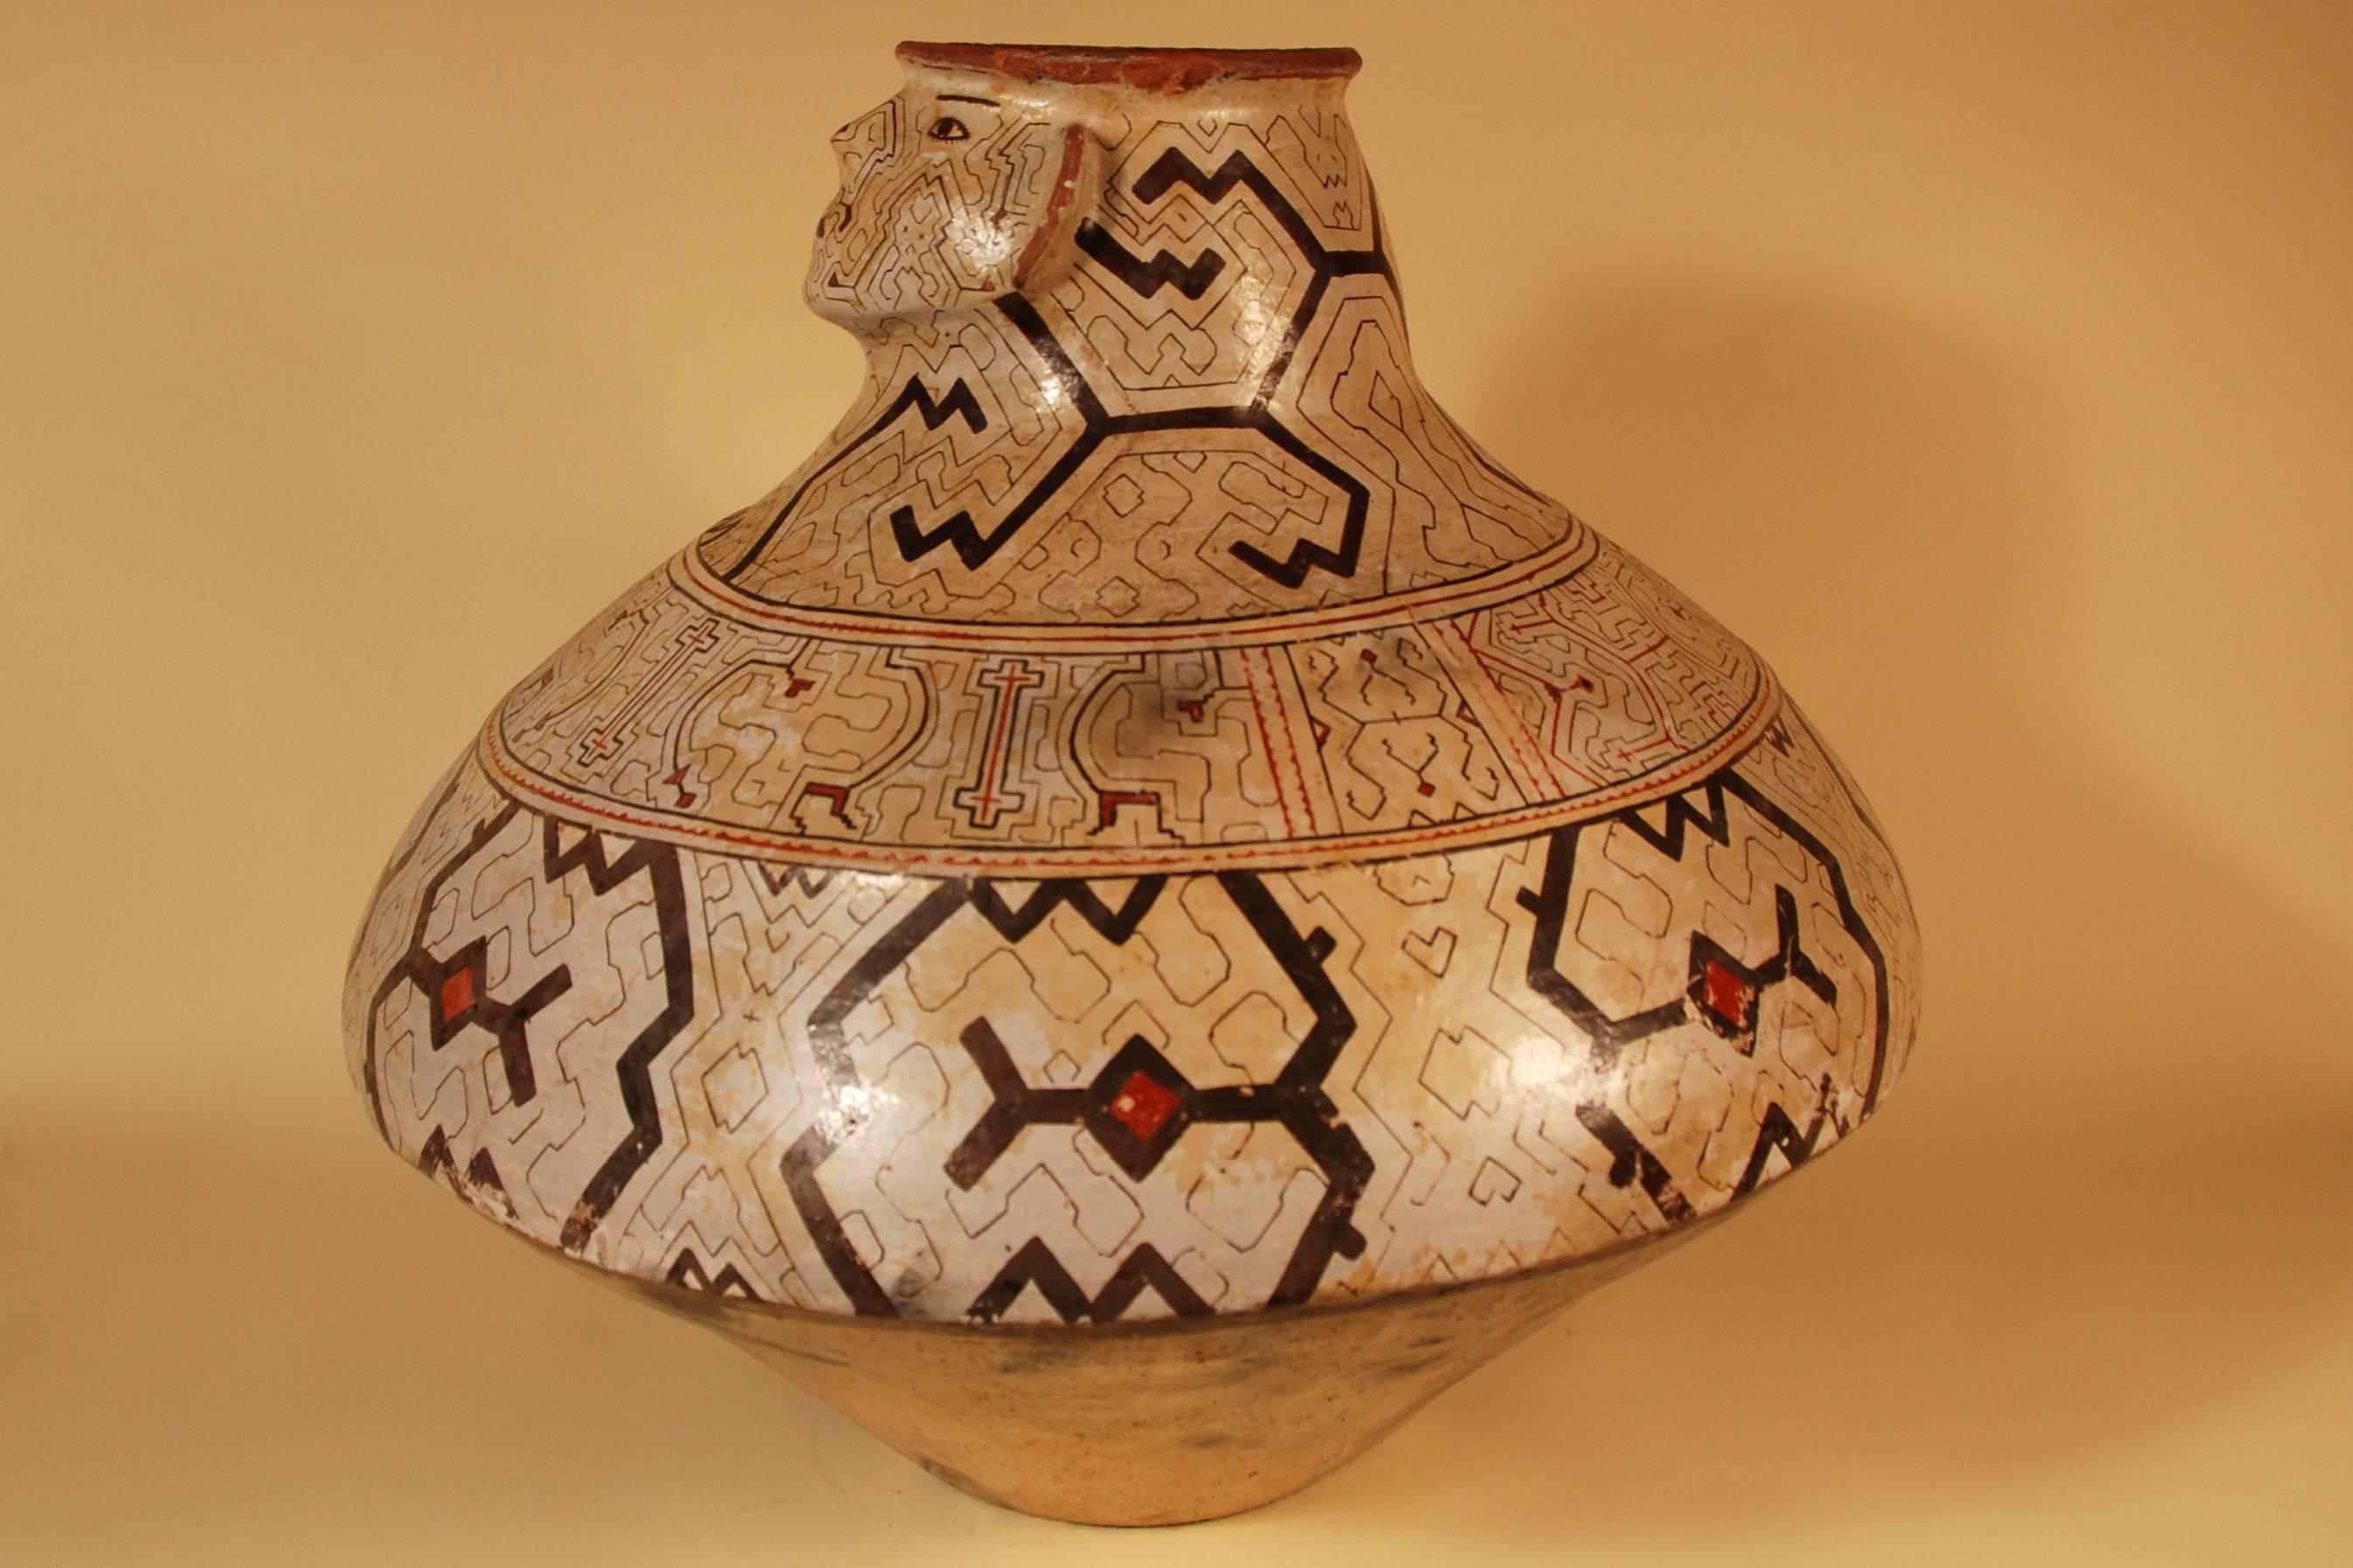 Offered by Callie Morgan Oakes
Mid-20th century large tribal ceramic single faced one of a kind pot
Shipibo culture Peruvian Amazon.

Each design is unique. With its natural pigments and bold geometric design the effect is a striking, handsome